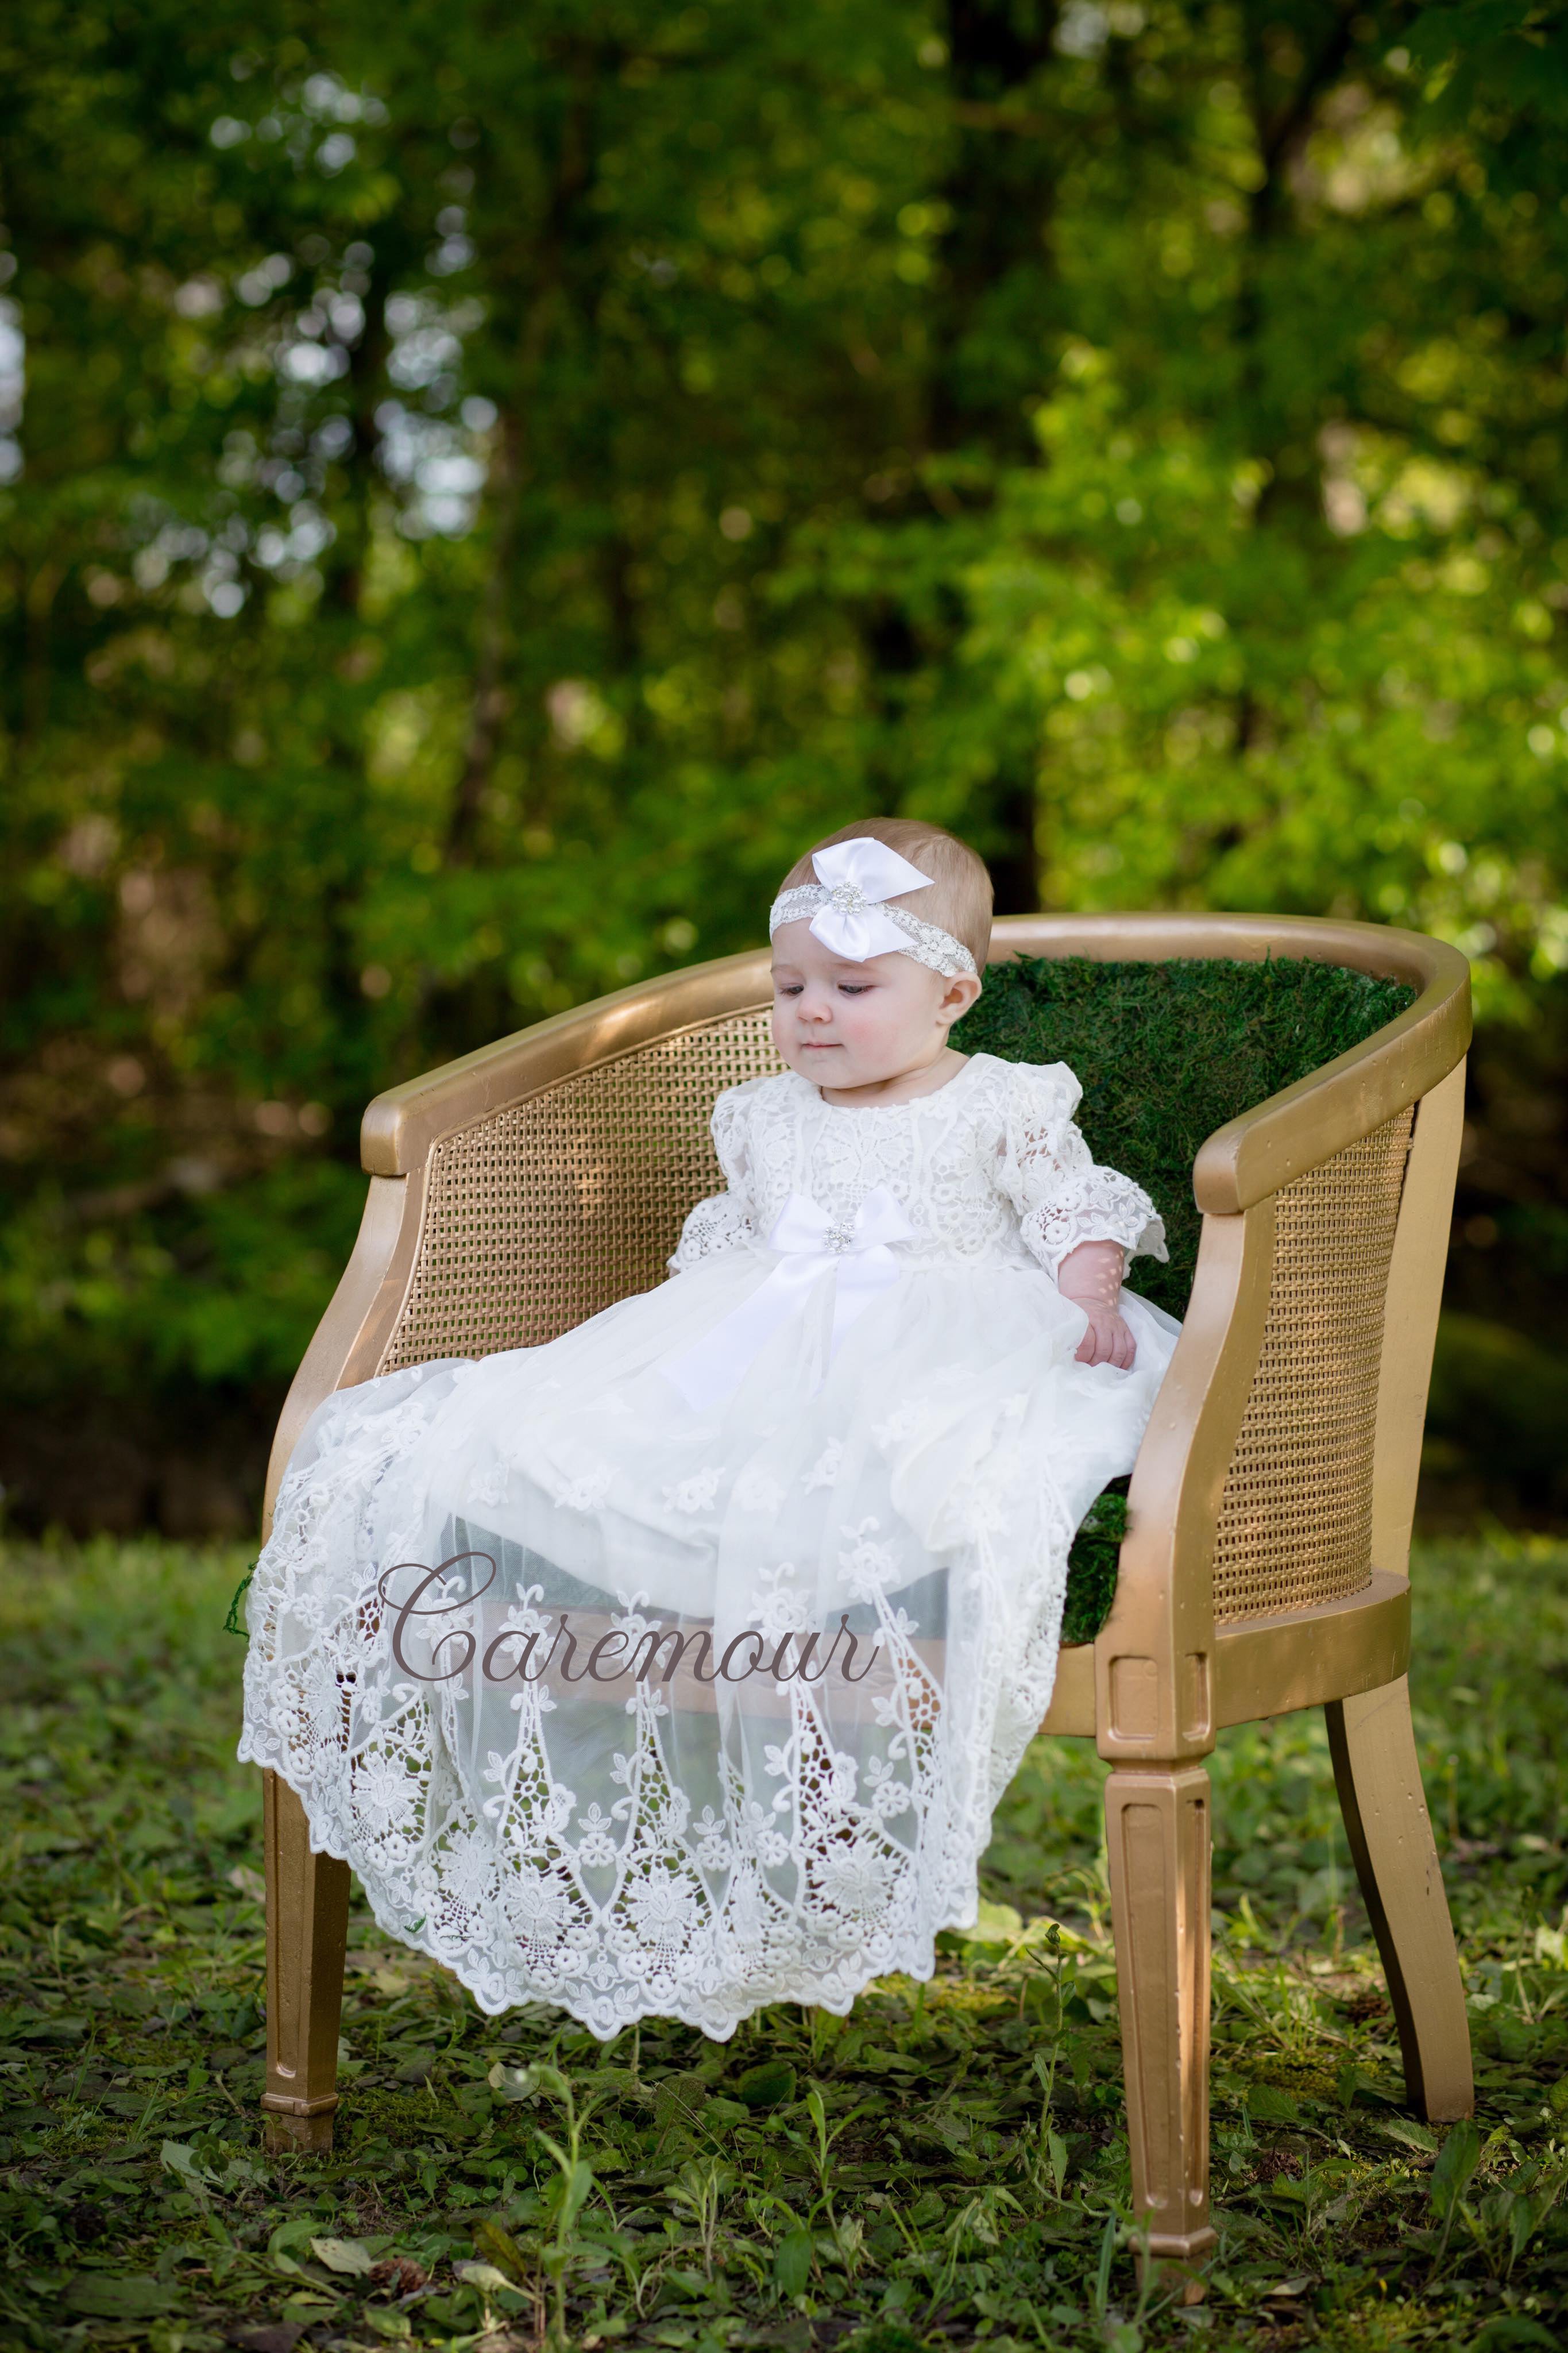 High Quality Christening Gowns  Baptism Apparel  Baptism Robes Stoles  Towels Apparel and Accessories  Churchings